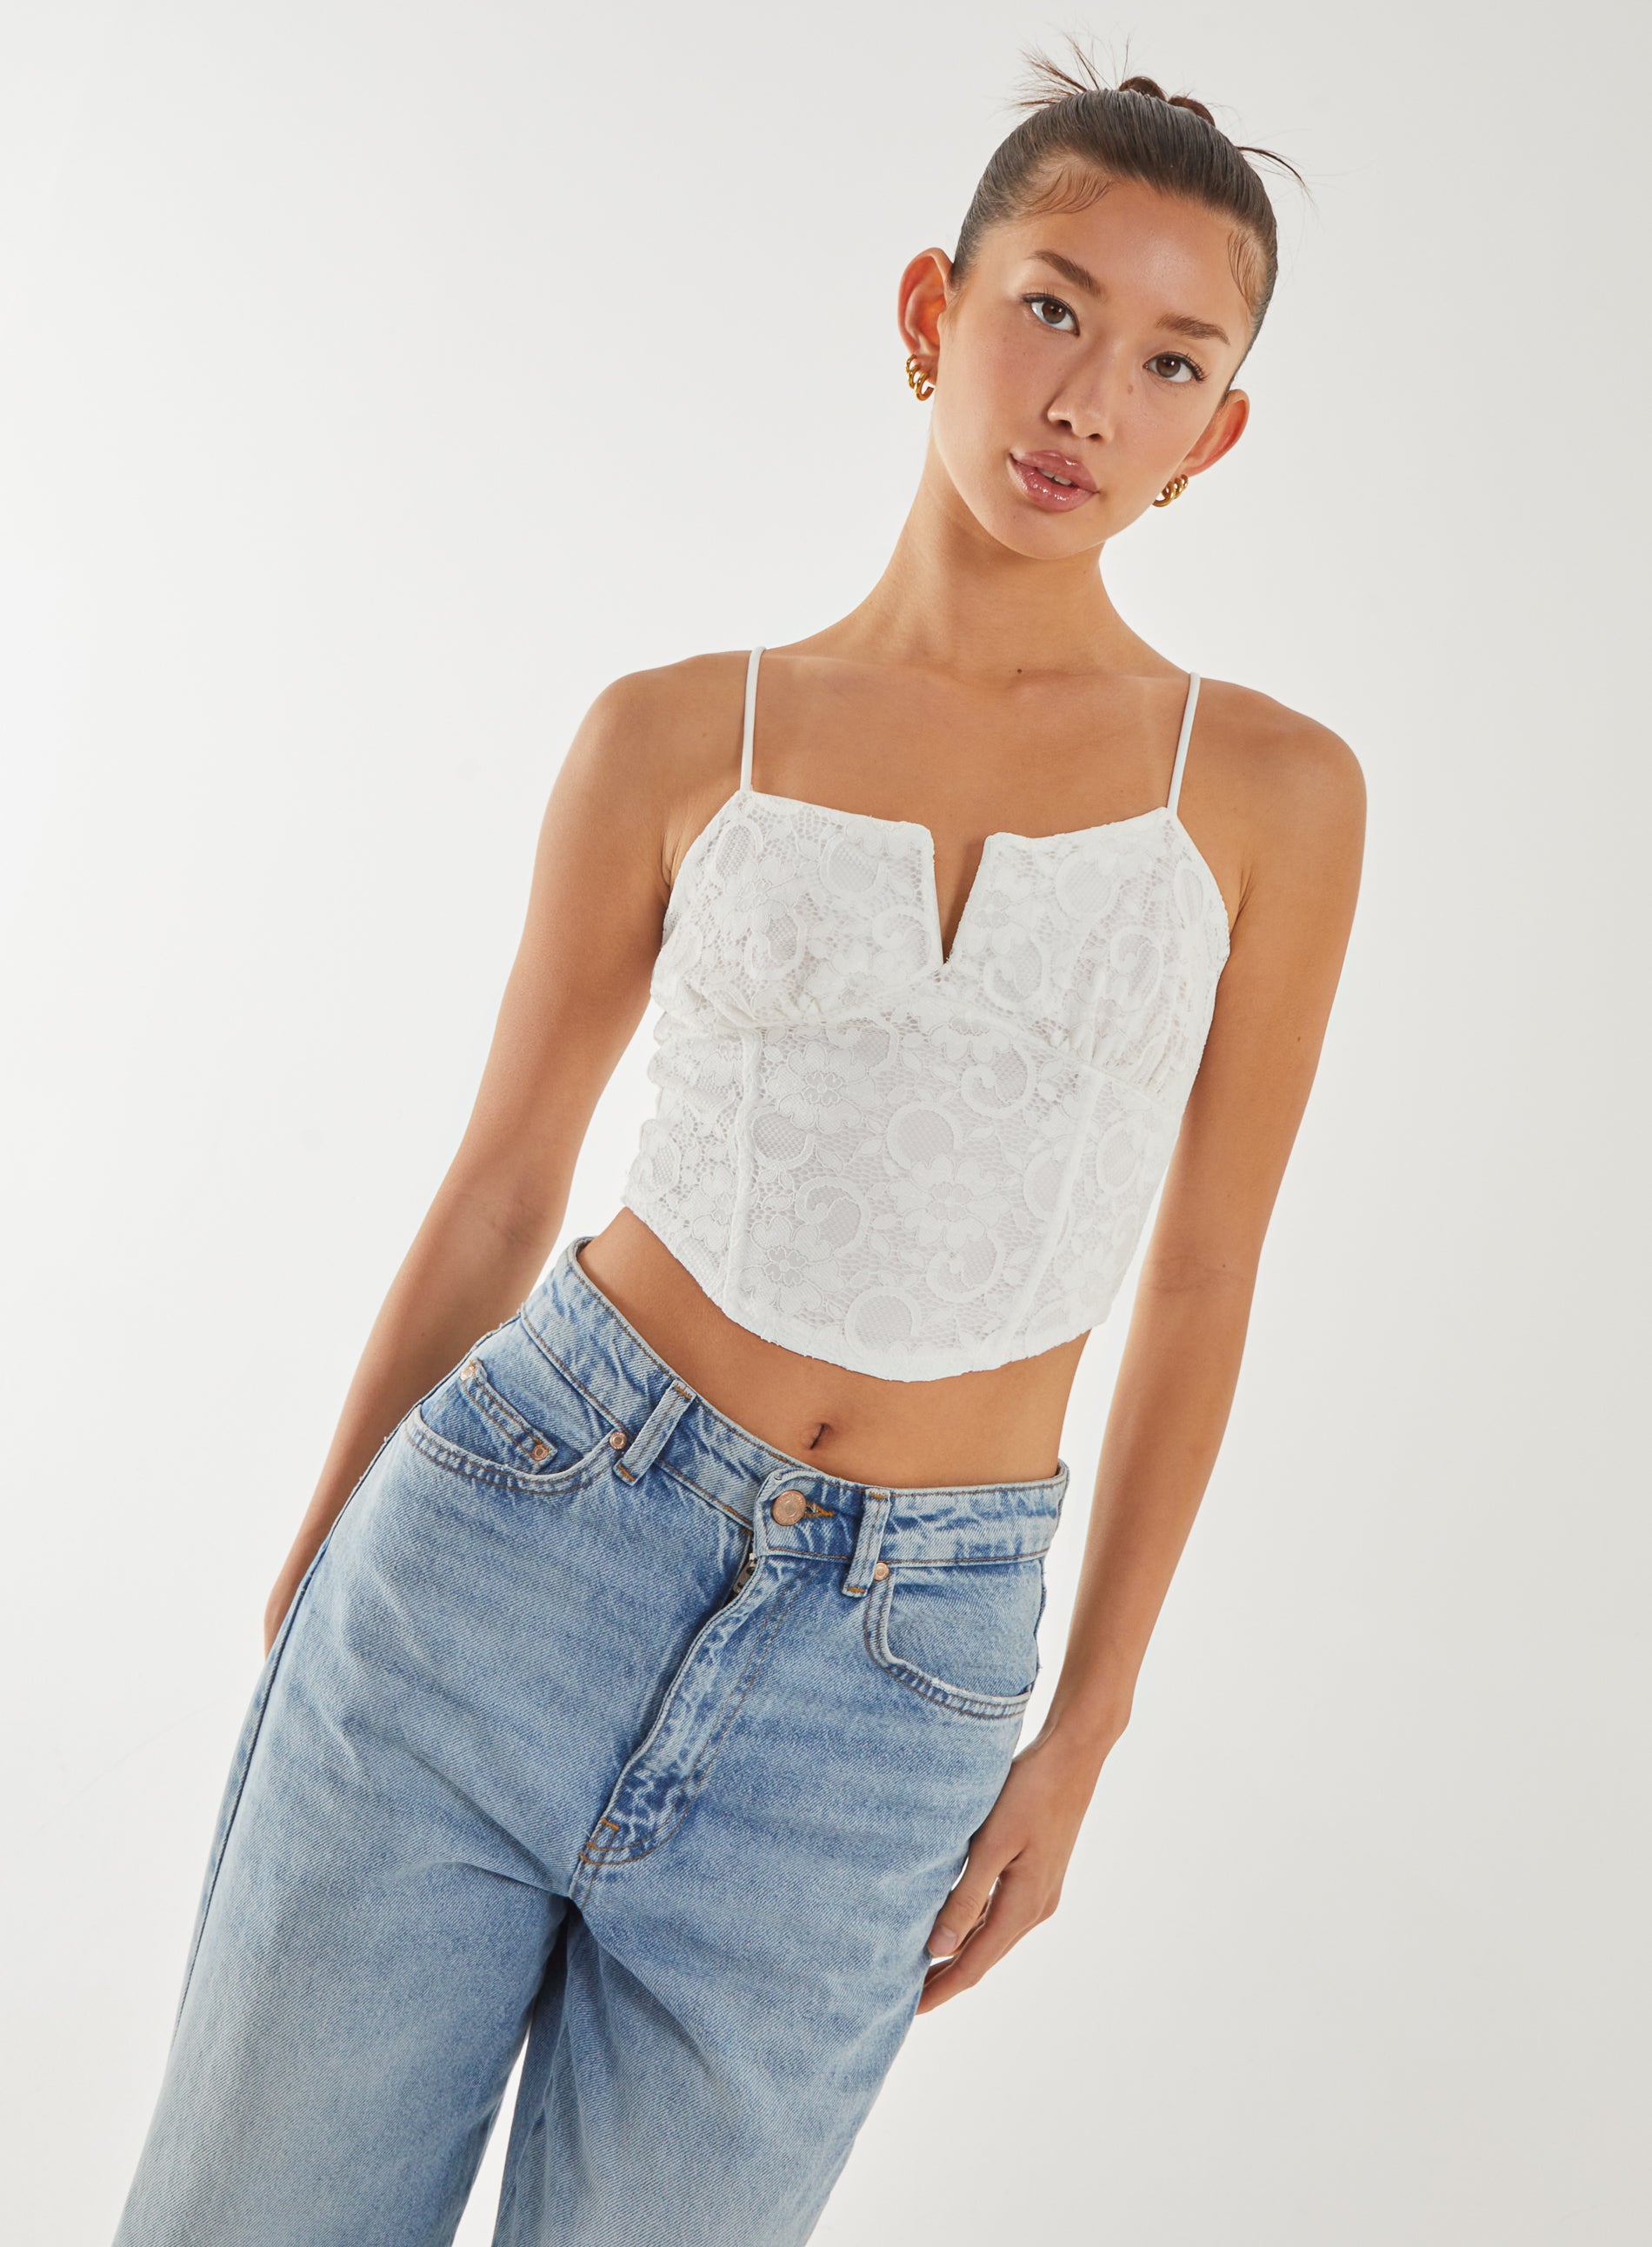 V-Detail Lace Strappy Top  - L  - IVORY